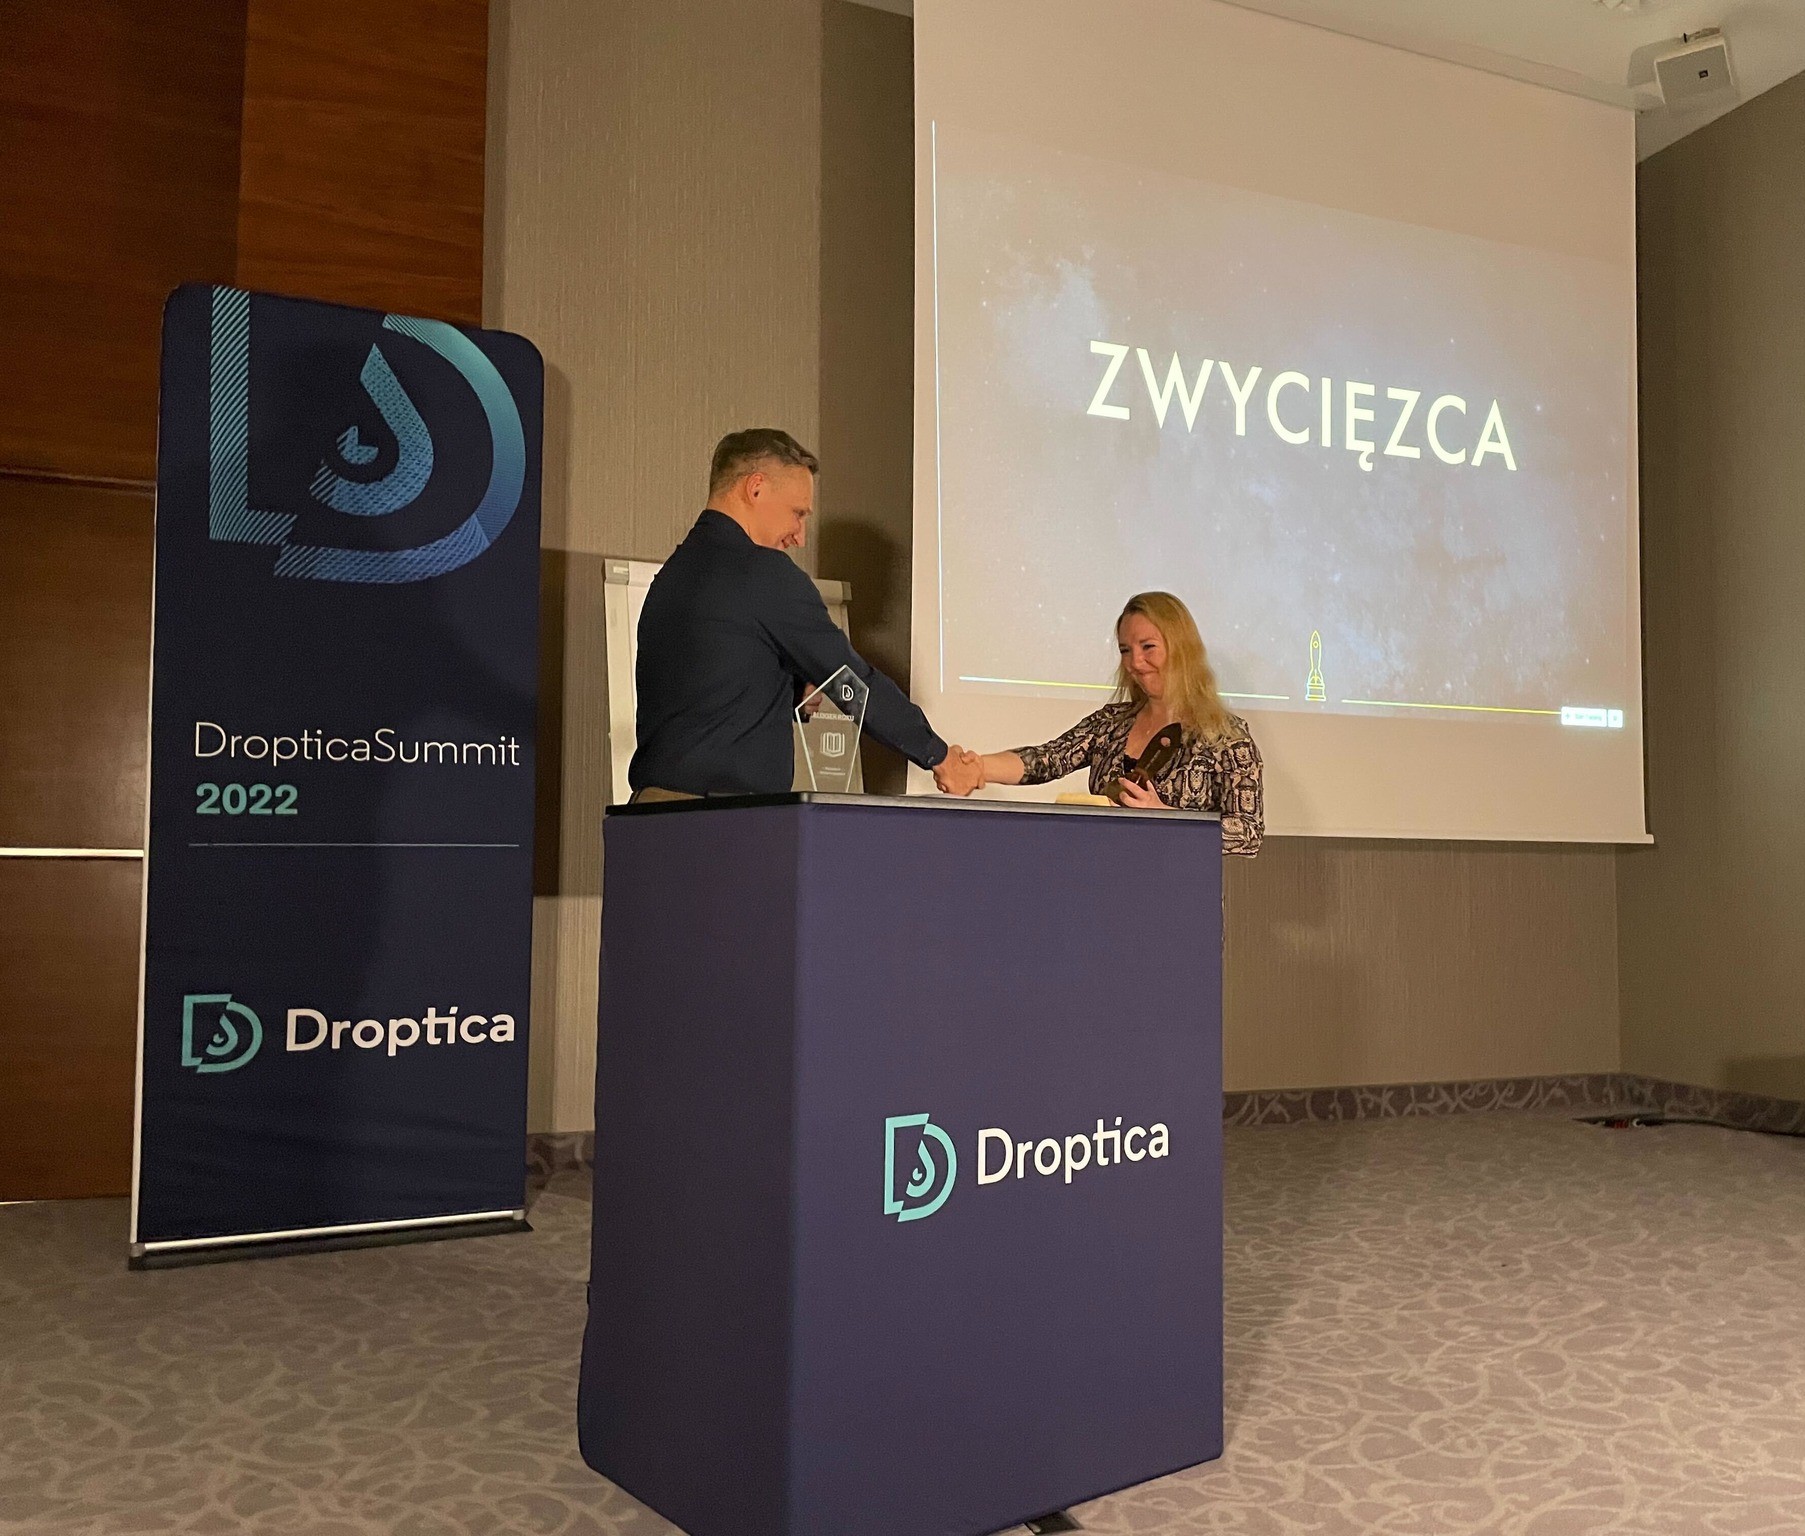 Złoty Komit is an award that we give at Droptica to distinguish an employee for their achievements